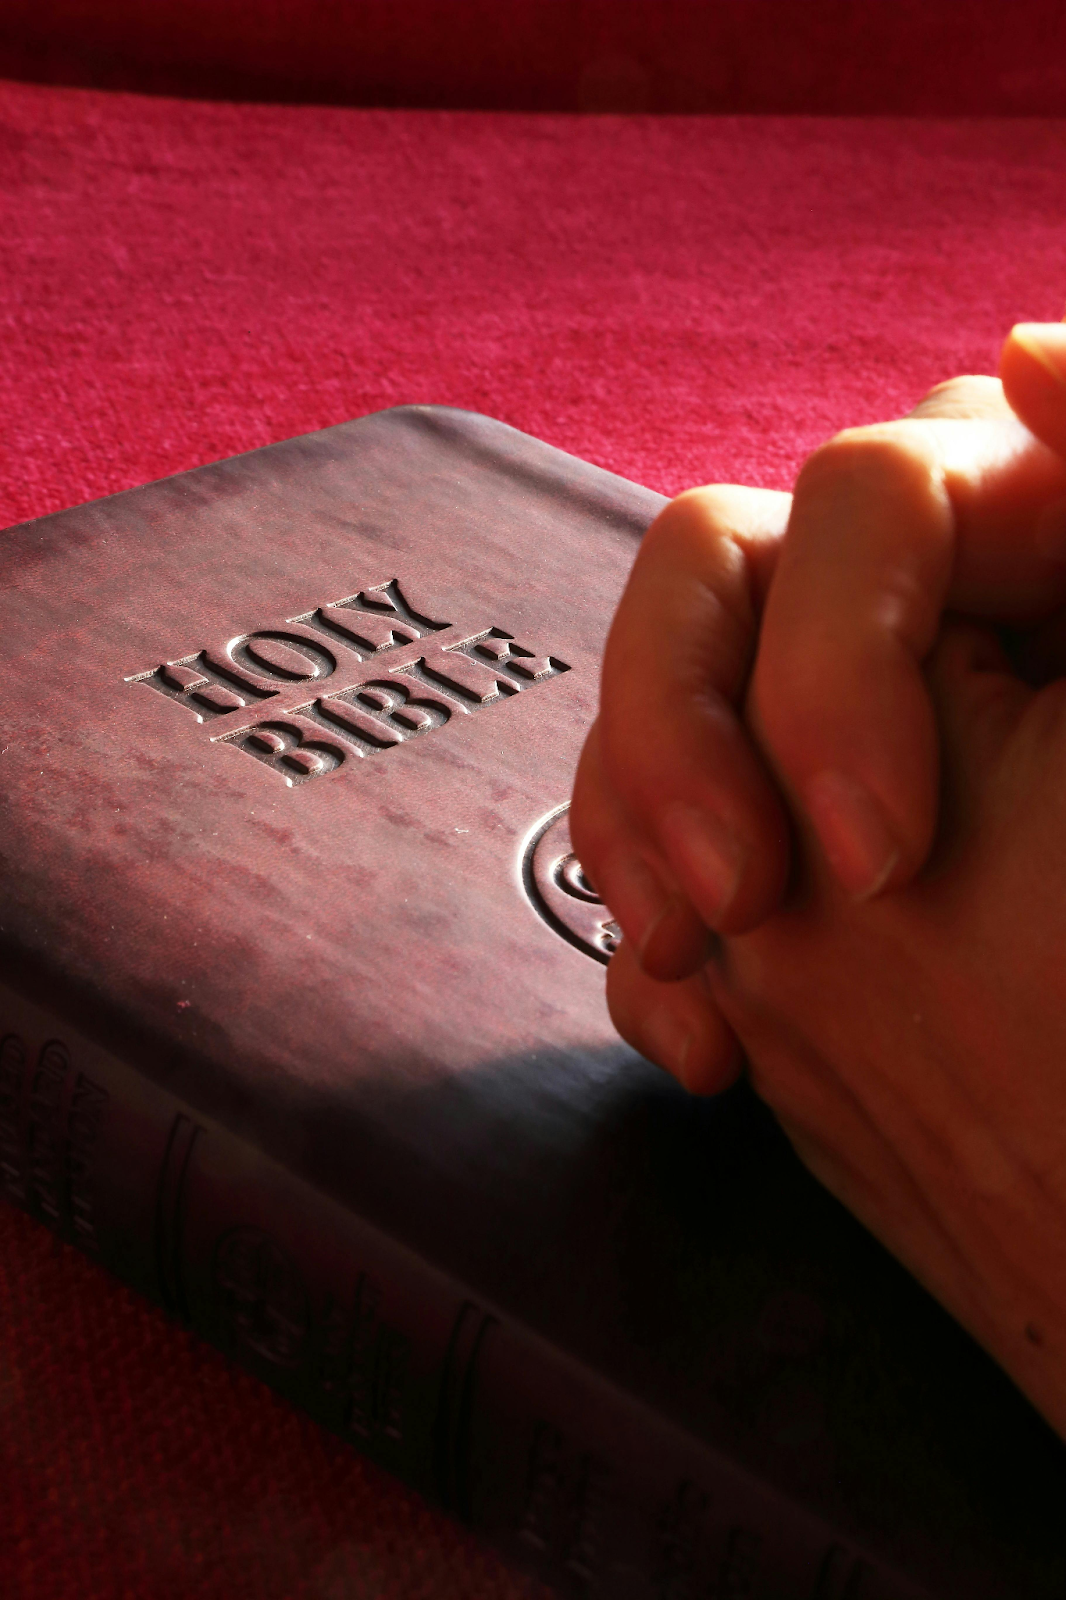 A shot of hands clasped atop the Holy Bible